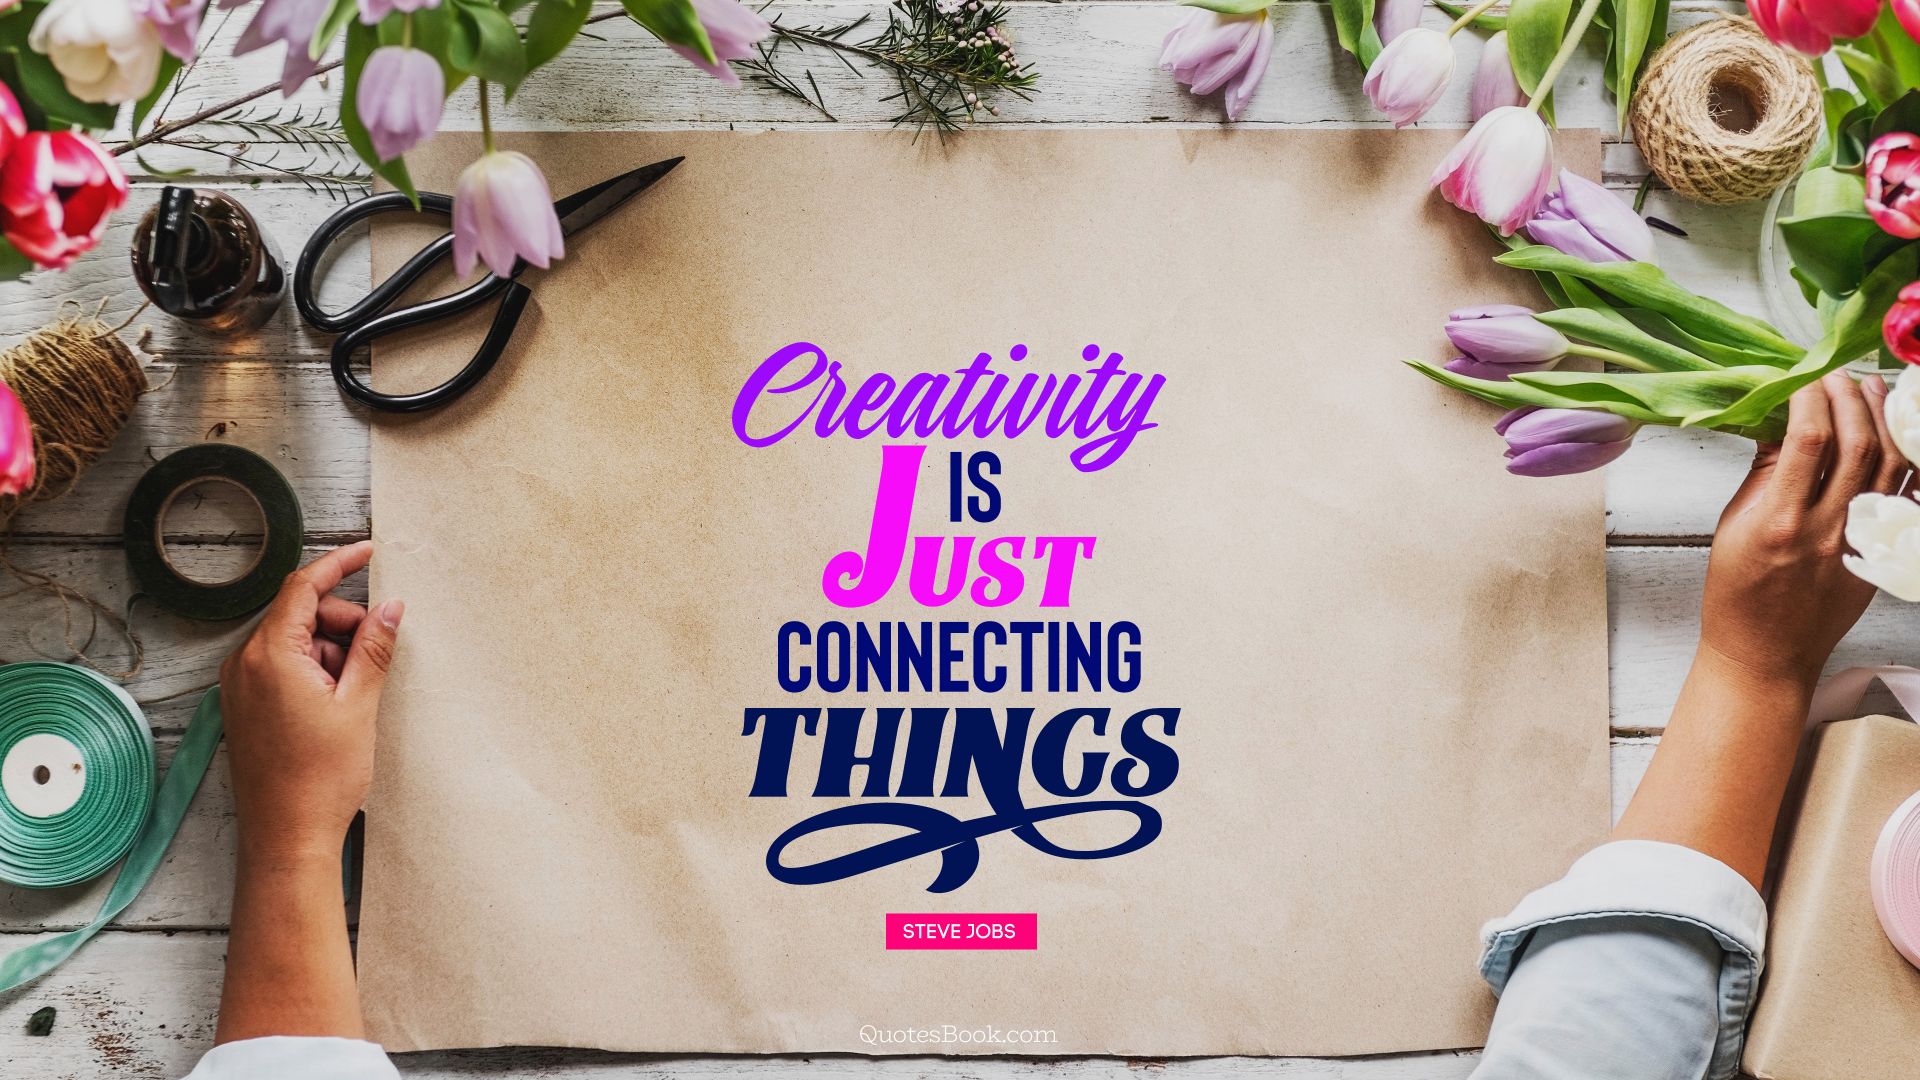 Creativity is just connecting things. - Quote by Steve Jobs